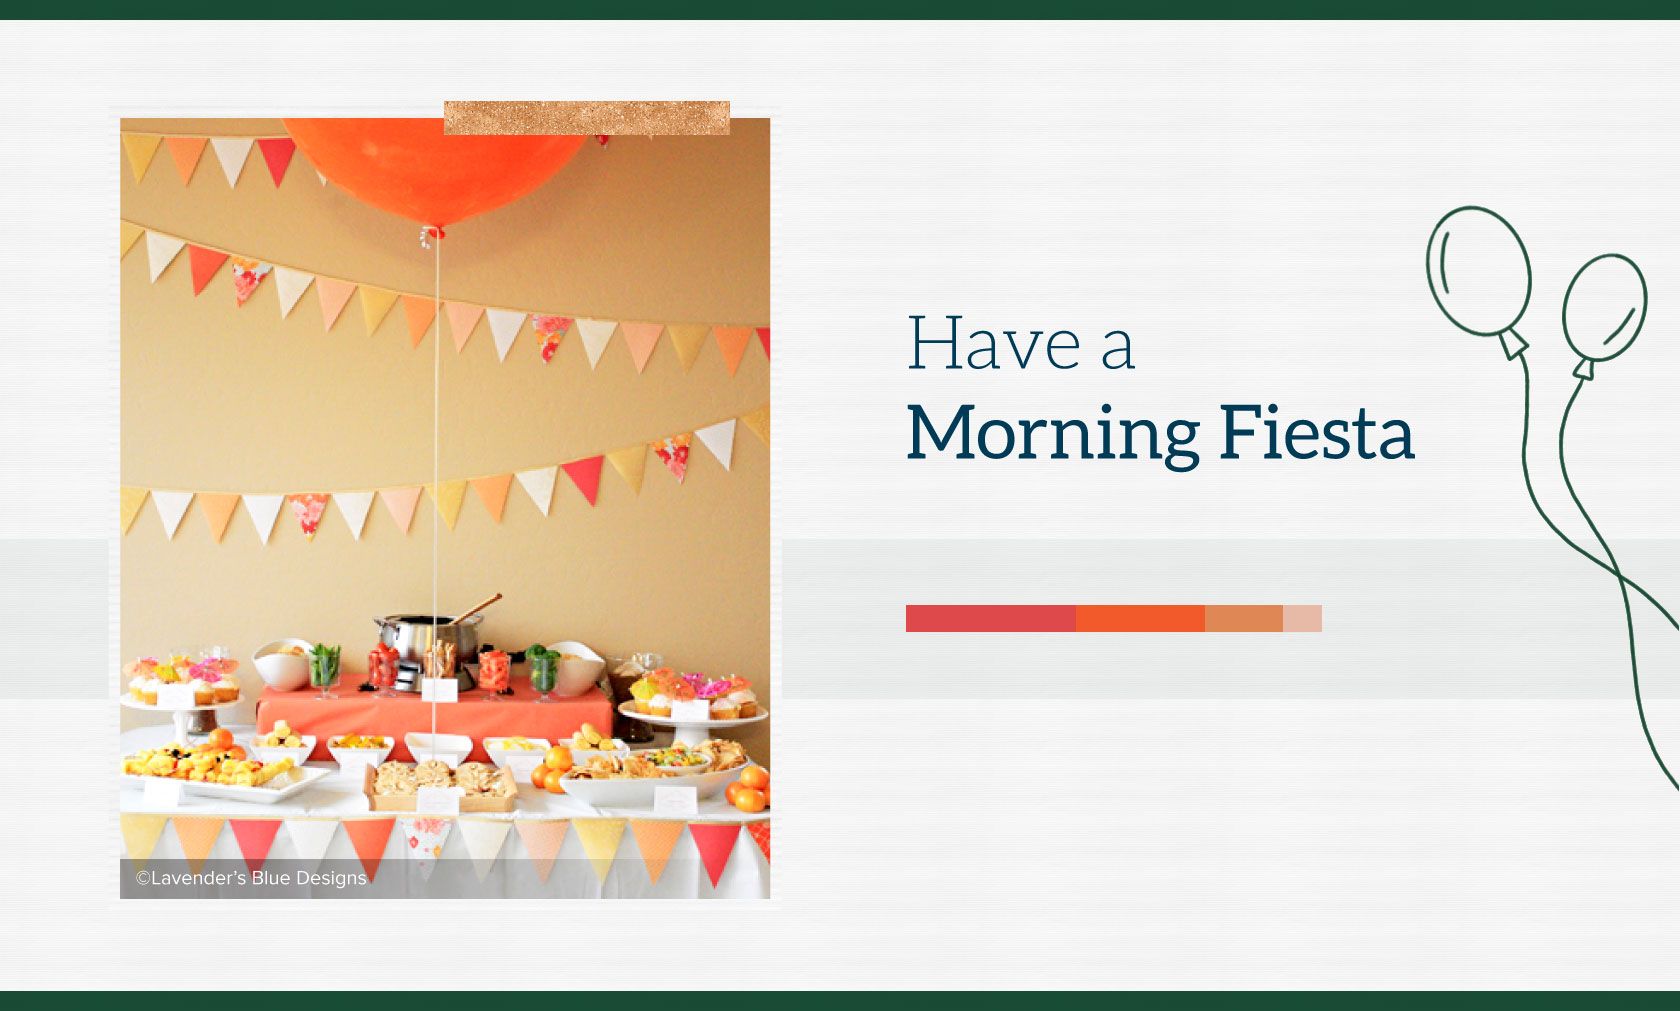 Have a Morning Fiesta